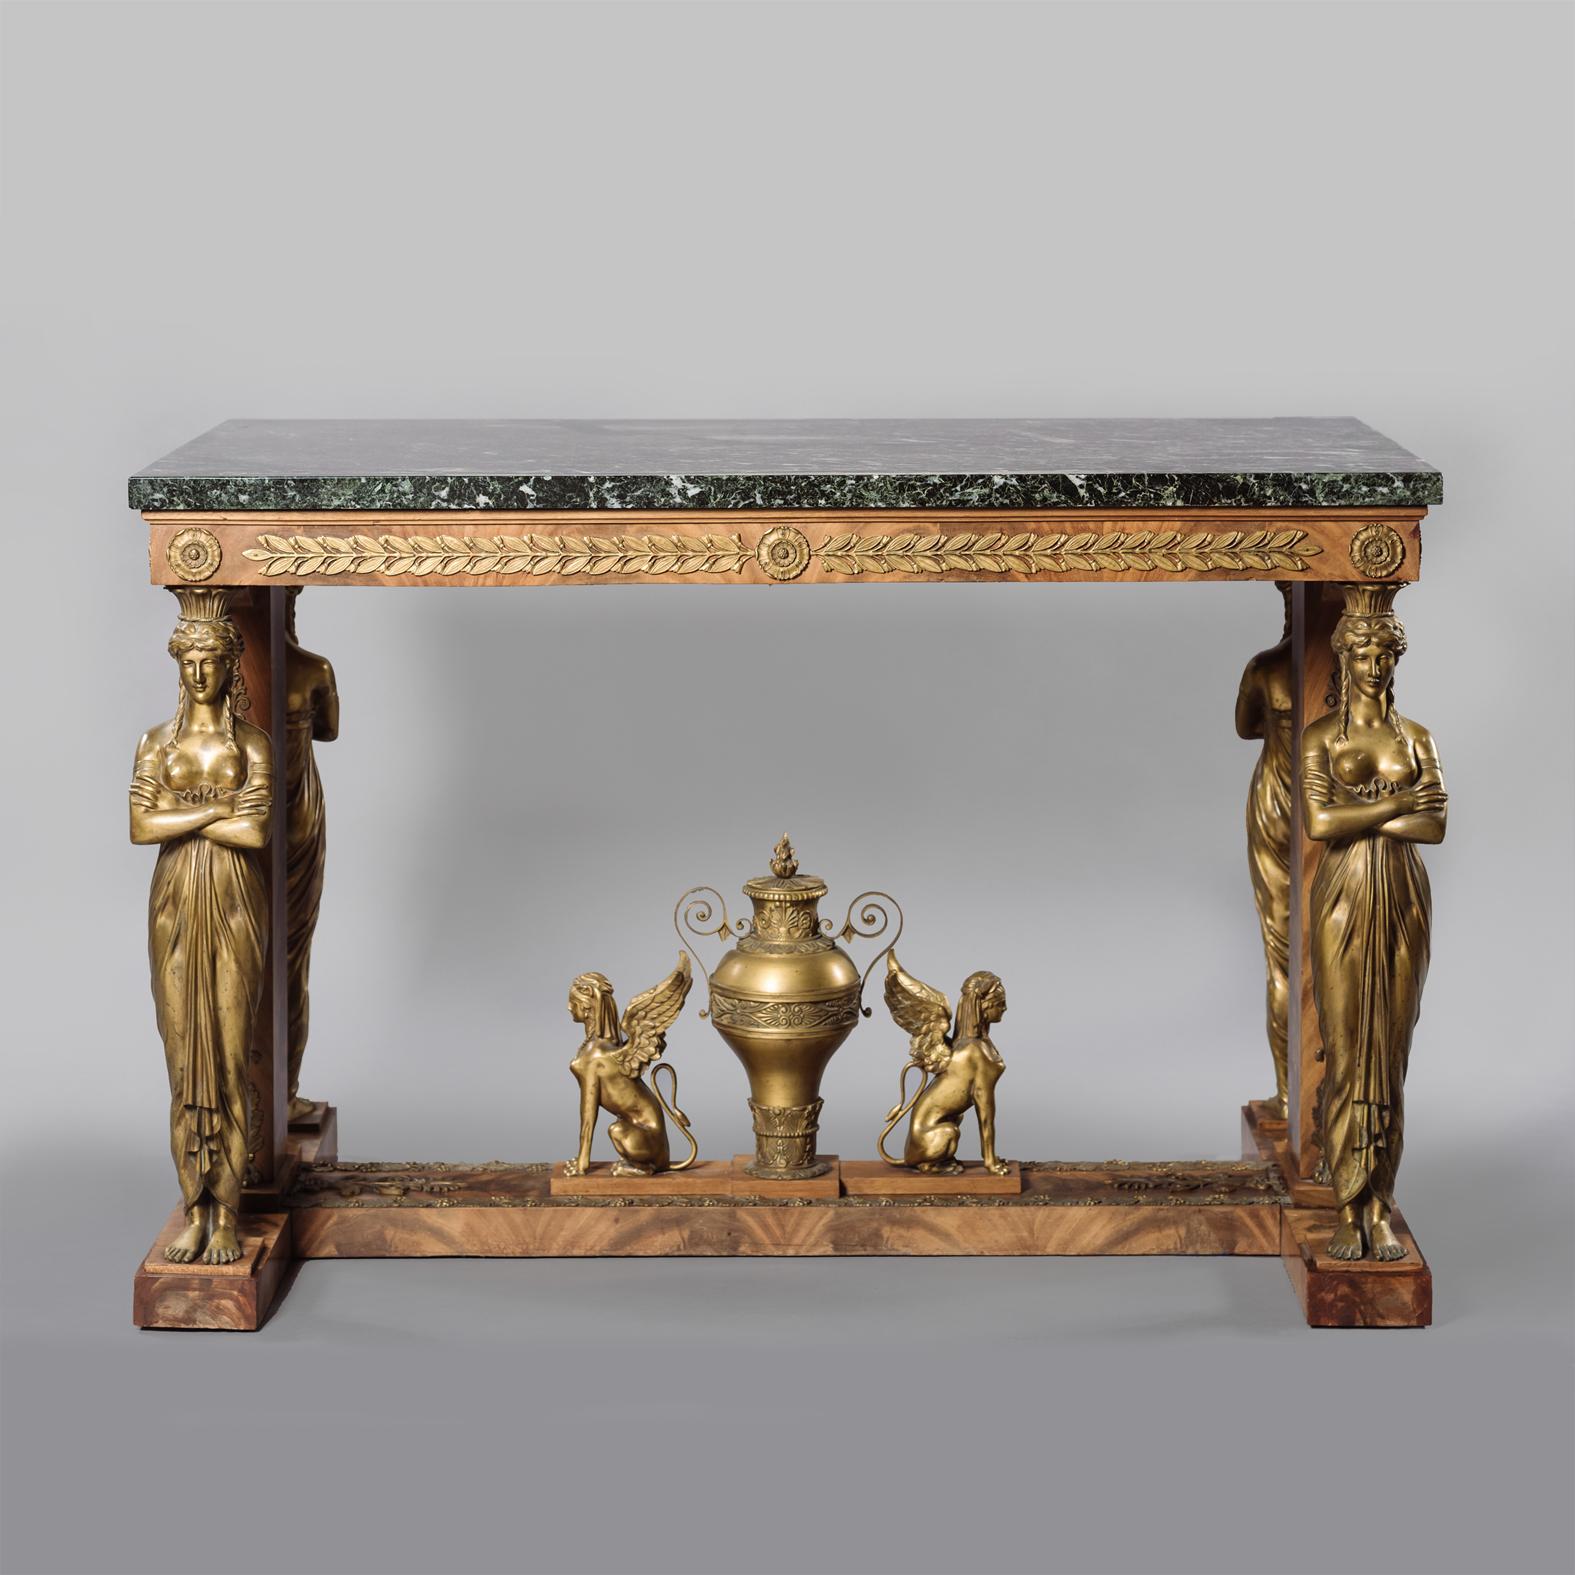 A very fine Empire style gilt-bronze mounted mahogany table de Milieu, with a Verde Antico Marble Top, in the Manner of Jacob Desmalter. 

The rectangular marble top above a frieze applied with laurel leaves on gilt-bronze female caryatid supports